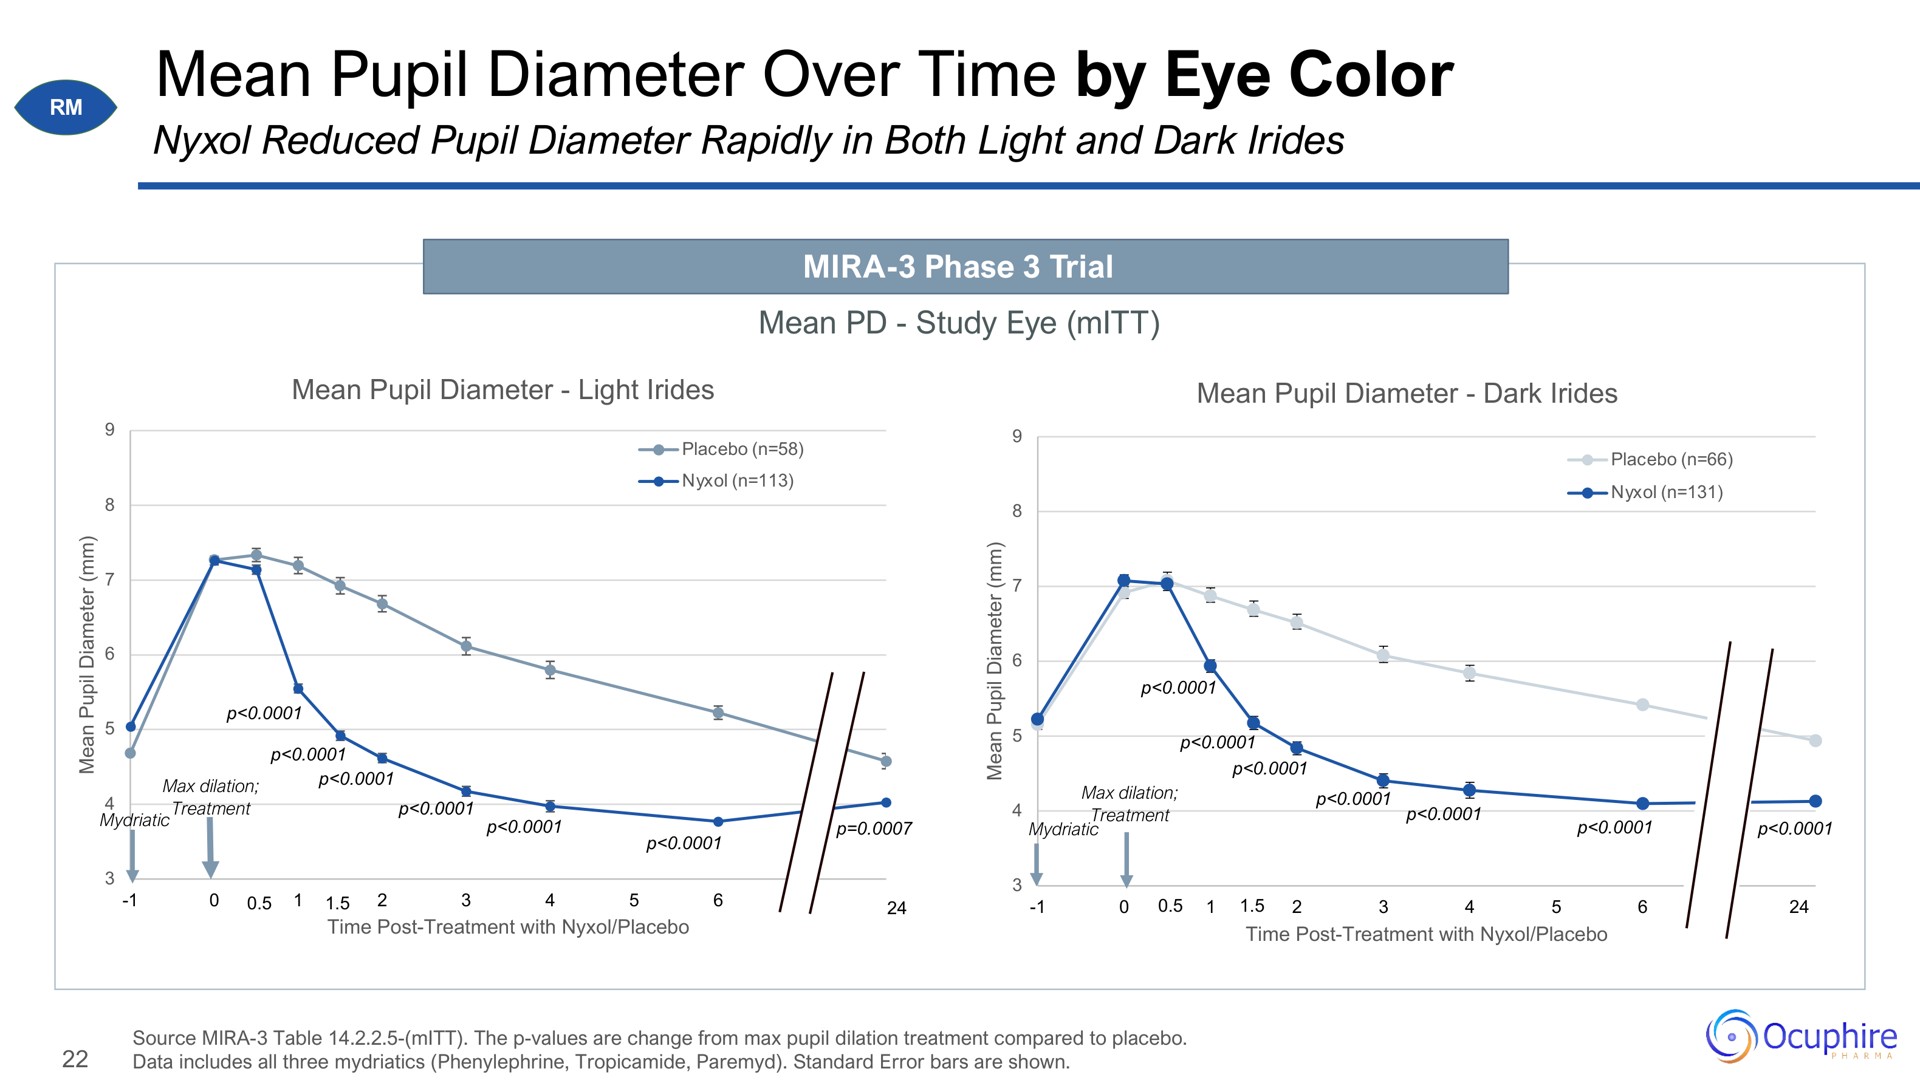 mean pupil diameter over time by eye color | Ocuphire Pharma